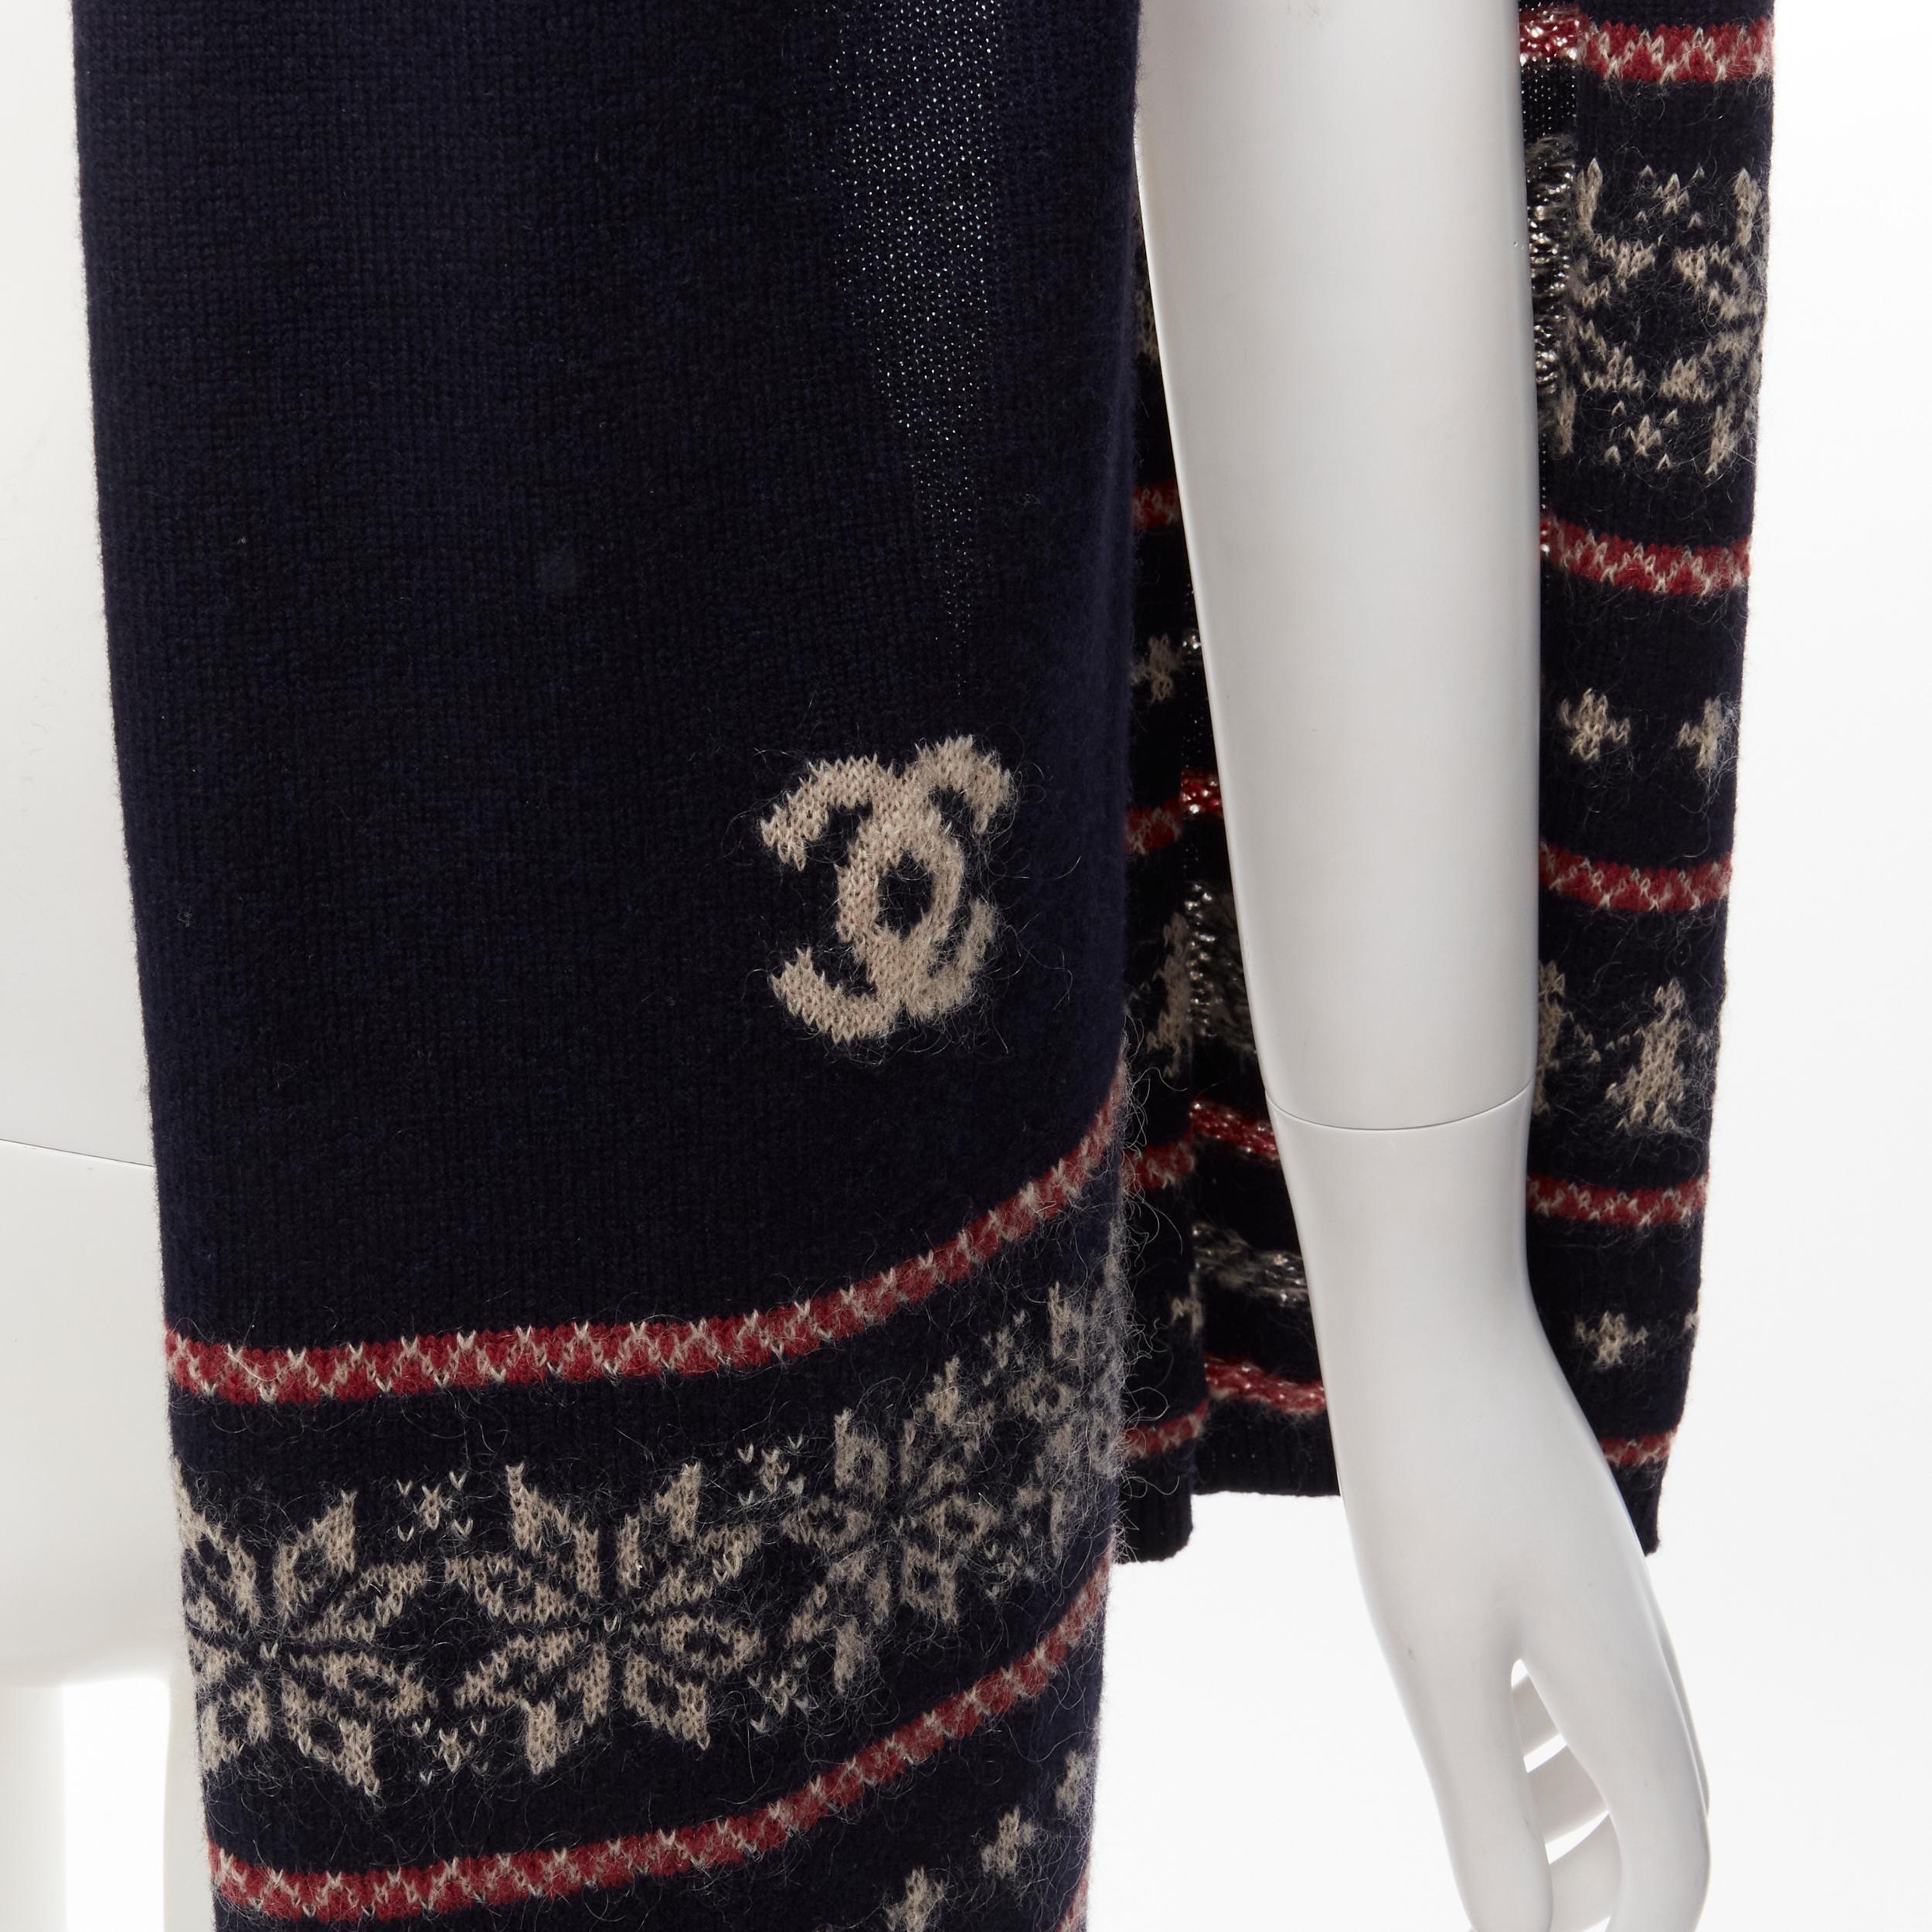 CHANEL CC logo wool cashmere mohair snowflake intarsia hooded muffler
Reference: TGAS/C01608
Brand: Chanel
Designer: Karl Lagerfeld
Material: Wool, Cashmere, Mohair
Color: Multicolour
Pattern: Graphic
Extra Details: Can be worn as a hood or as a